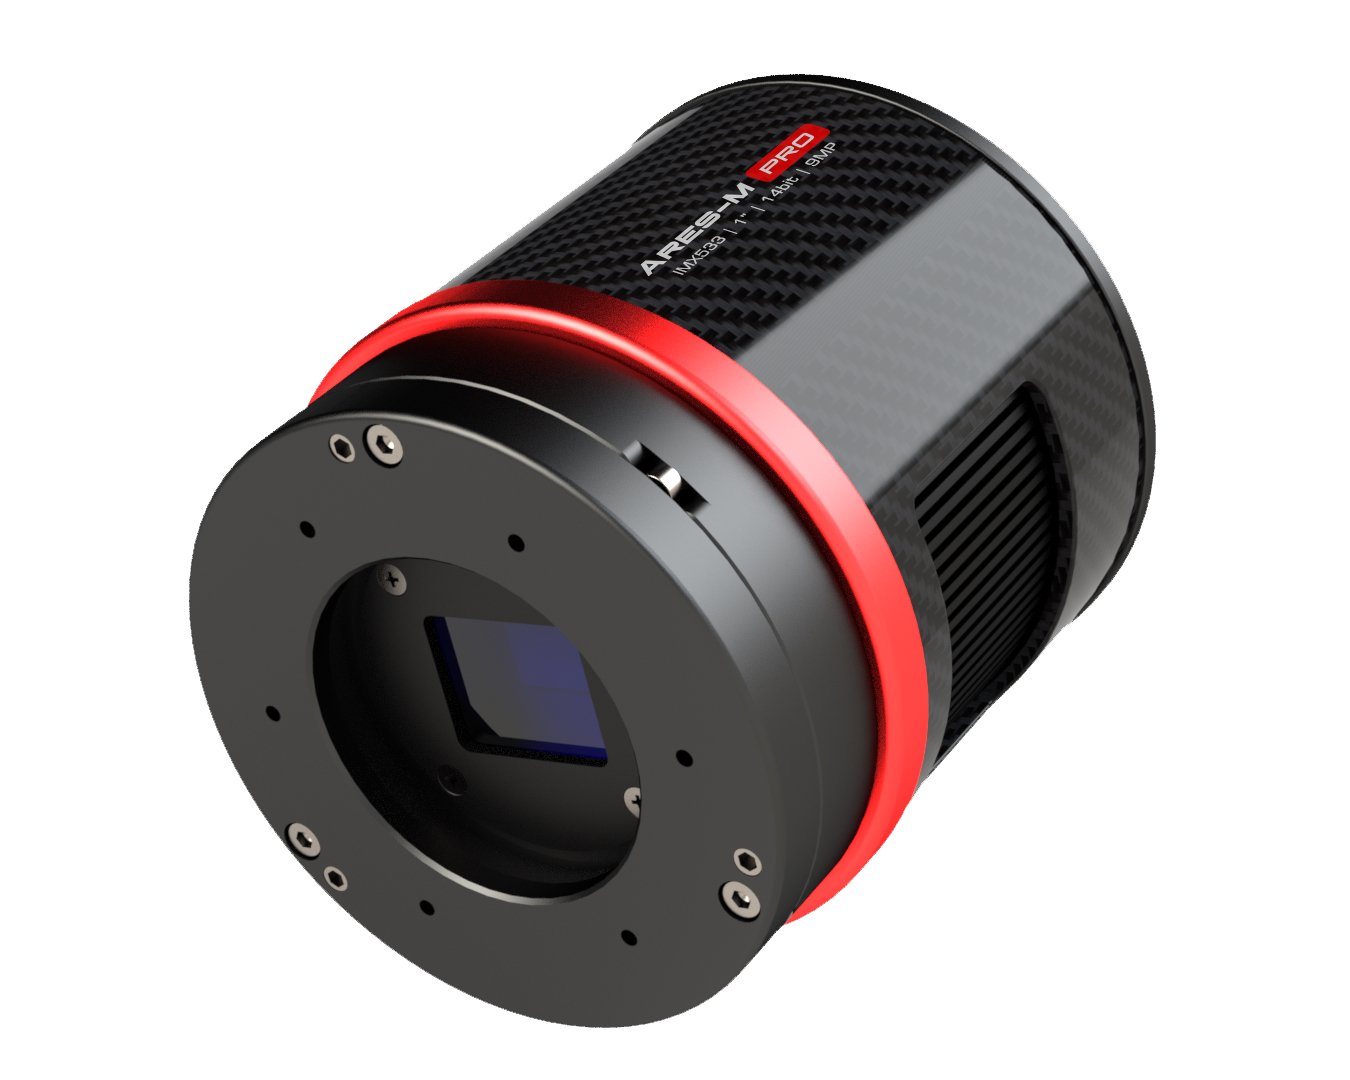 Player One Ares-M Pro (IMX 533) Cooled Camera